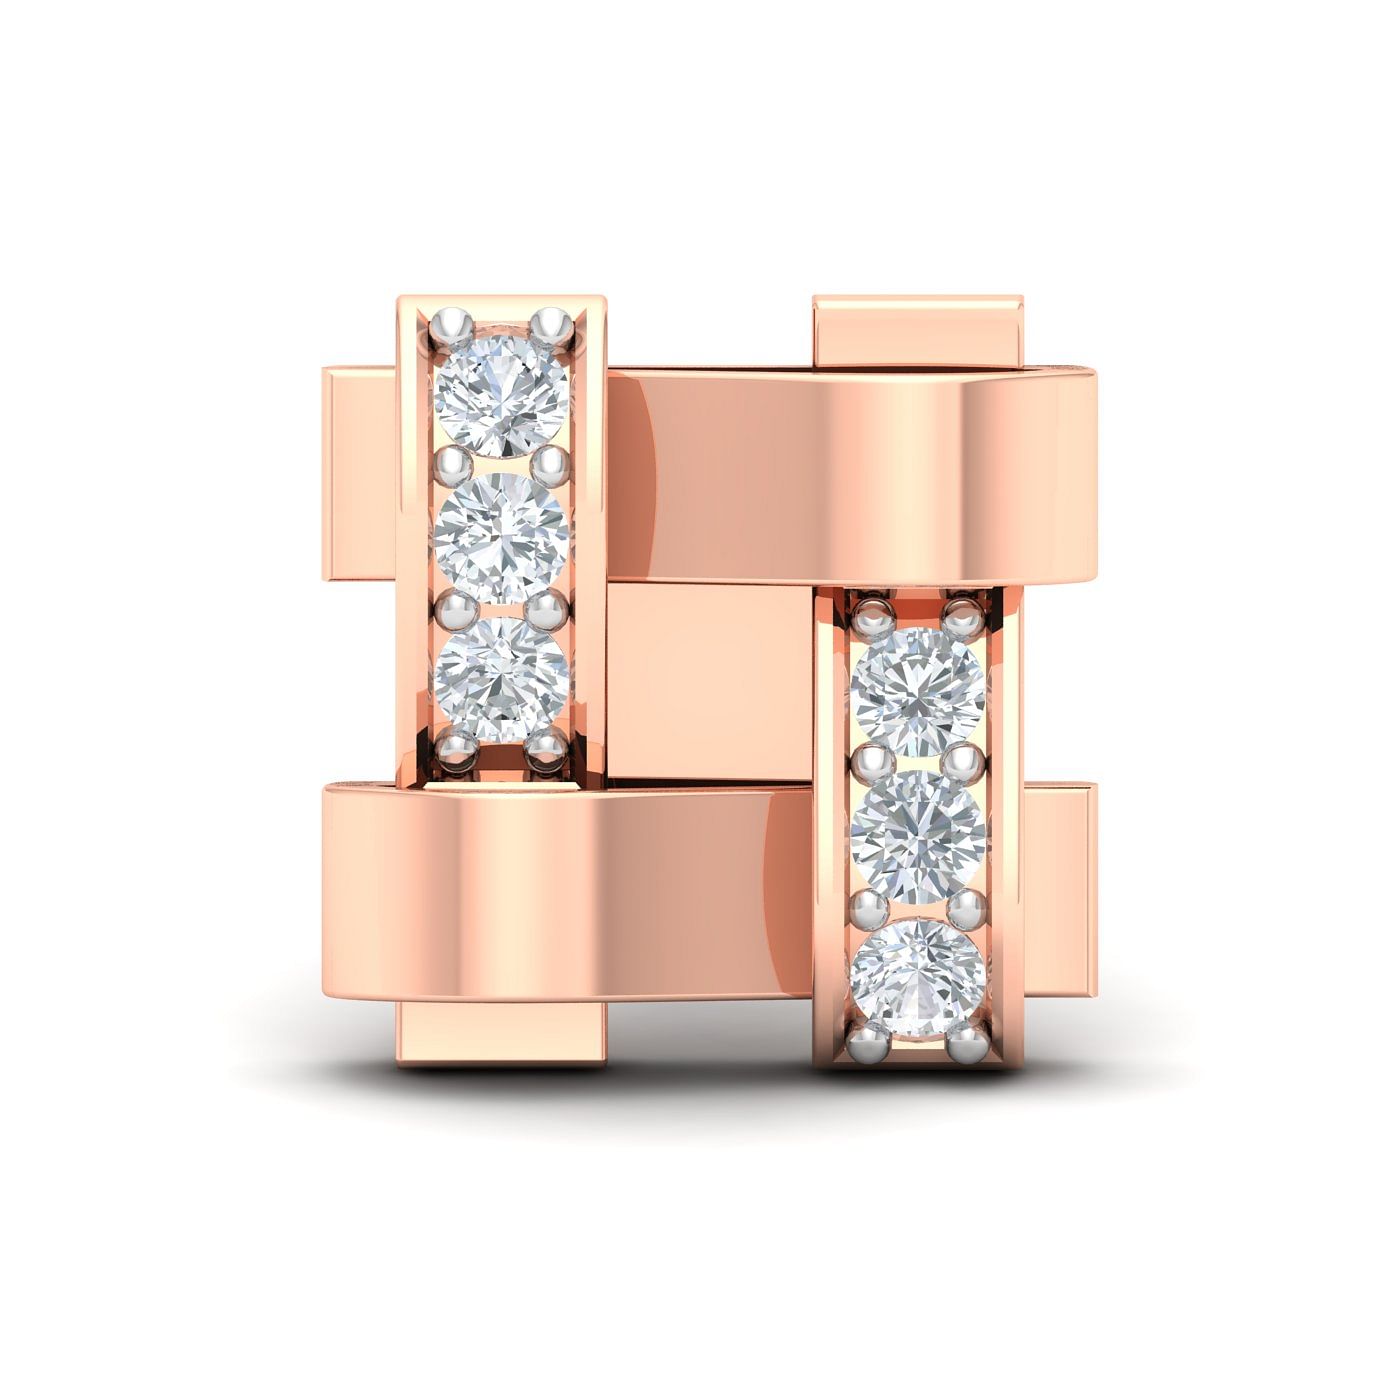 Rose Gold Simon Diamond Men's Stud Earrings Who says jewellery has to be boring? If you're looking for something a little more exciting